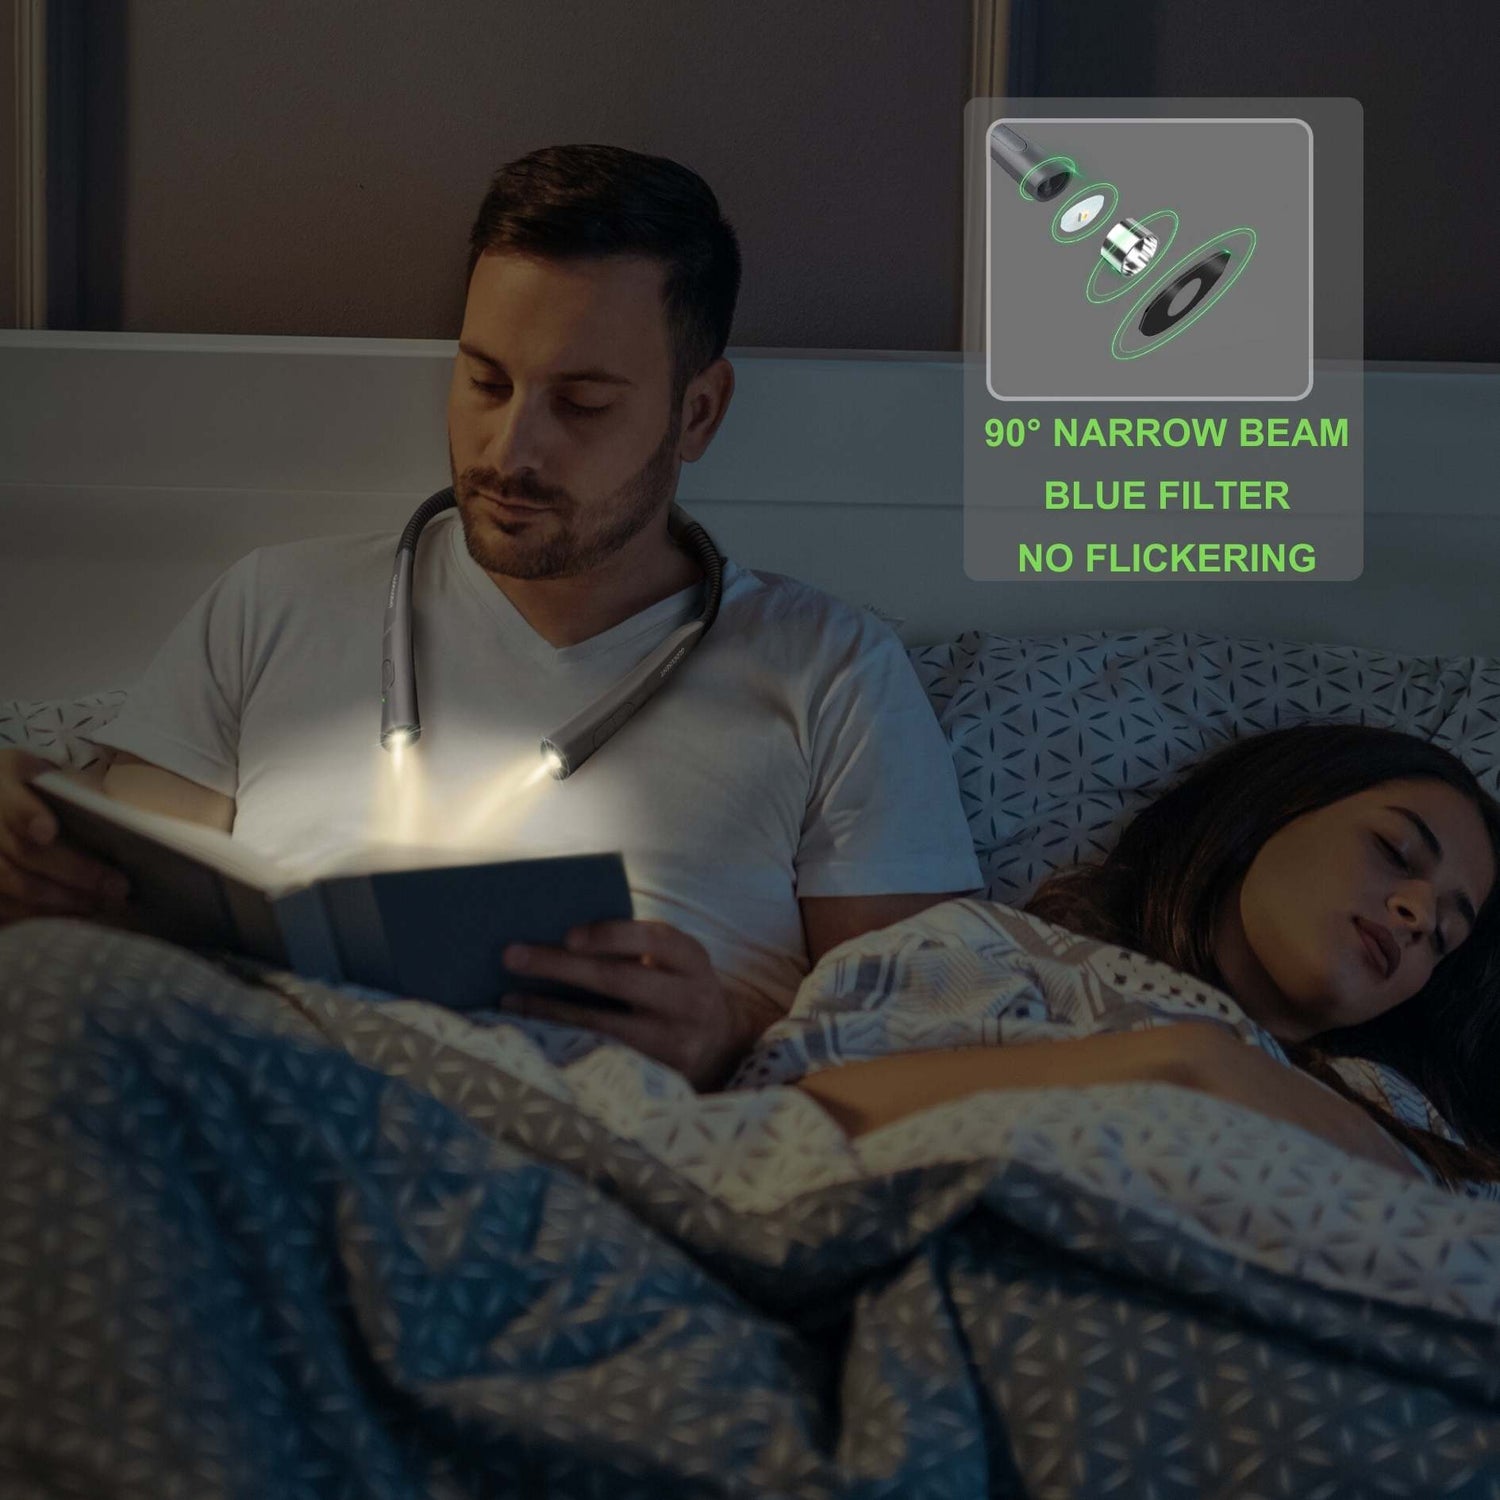 man using the neck light for reading a book while partner is sleeping